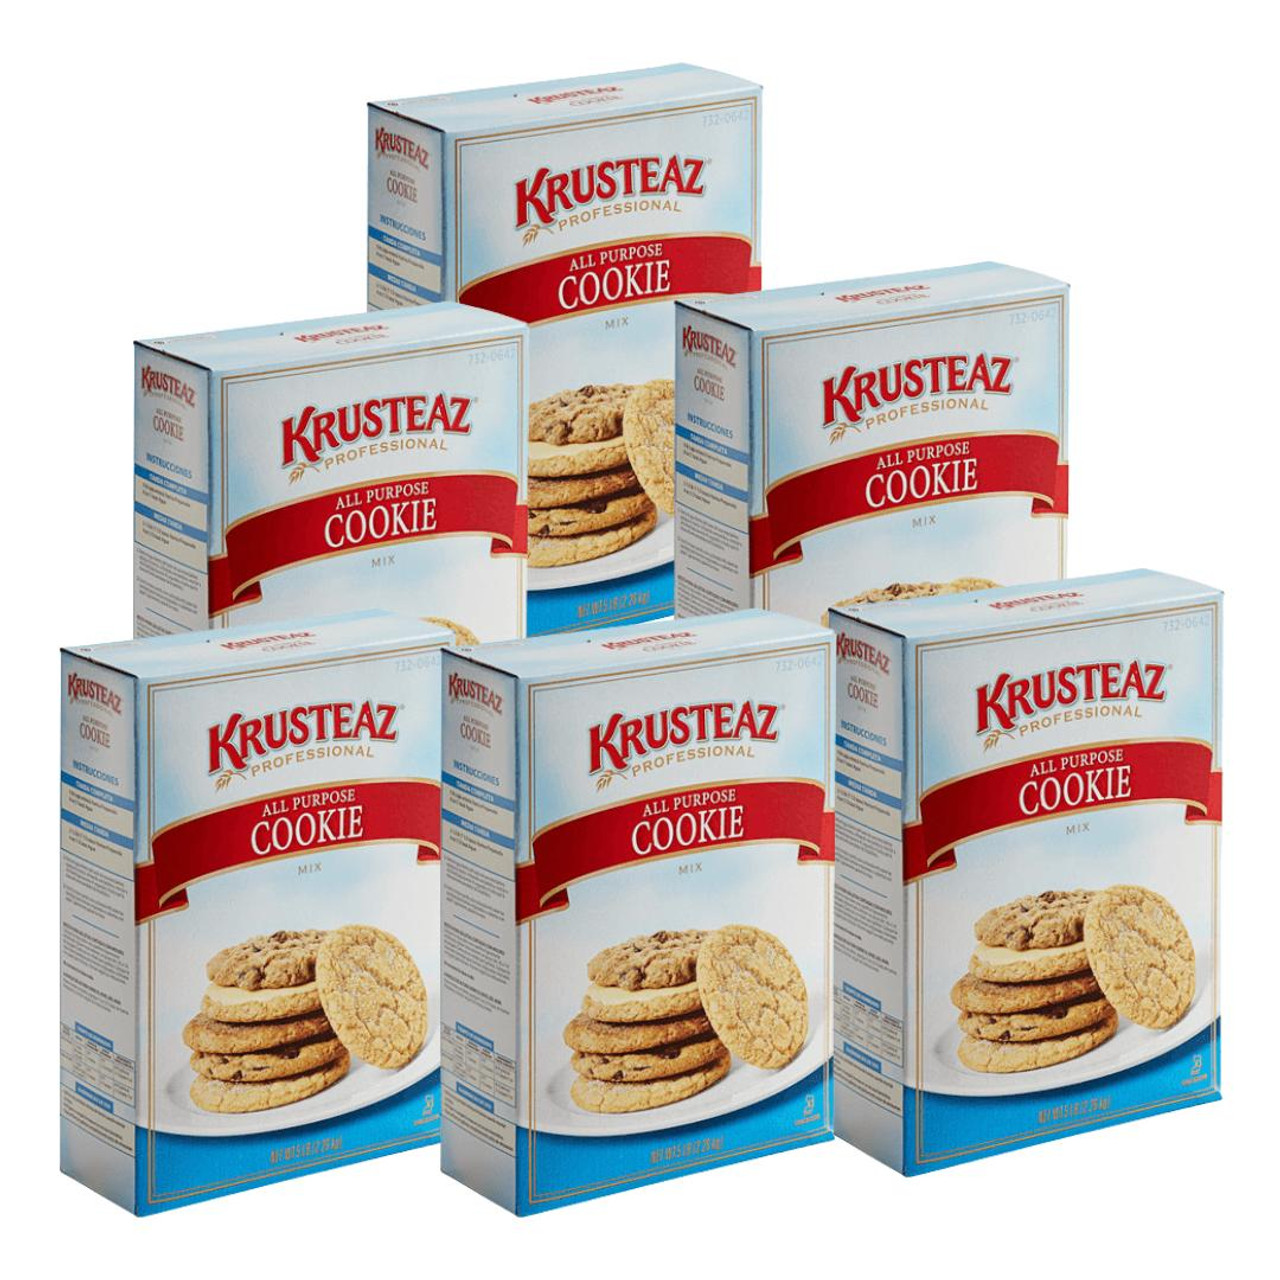 https://cdn11.bigcommerce.com/s-g5ygv2at8j/images/stencil/1280x1280/products/14100/29277/krusteaz-krusteaz-professional-5-lbs2.26-kgs-all-purpose-cookie-mix-6case__85124.1688346769.jpg?c=1